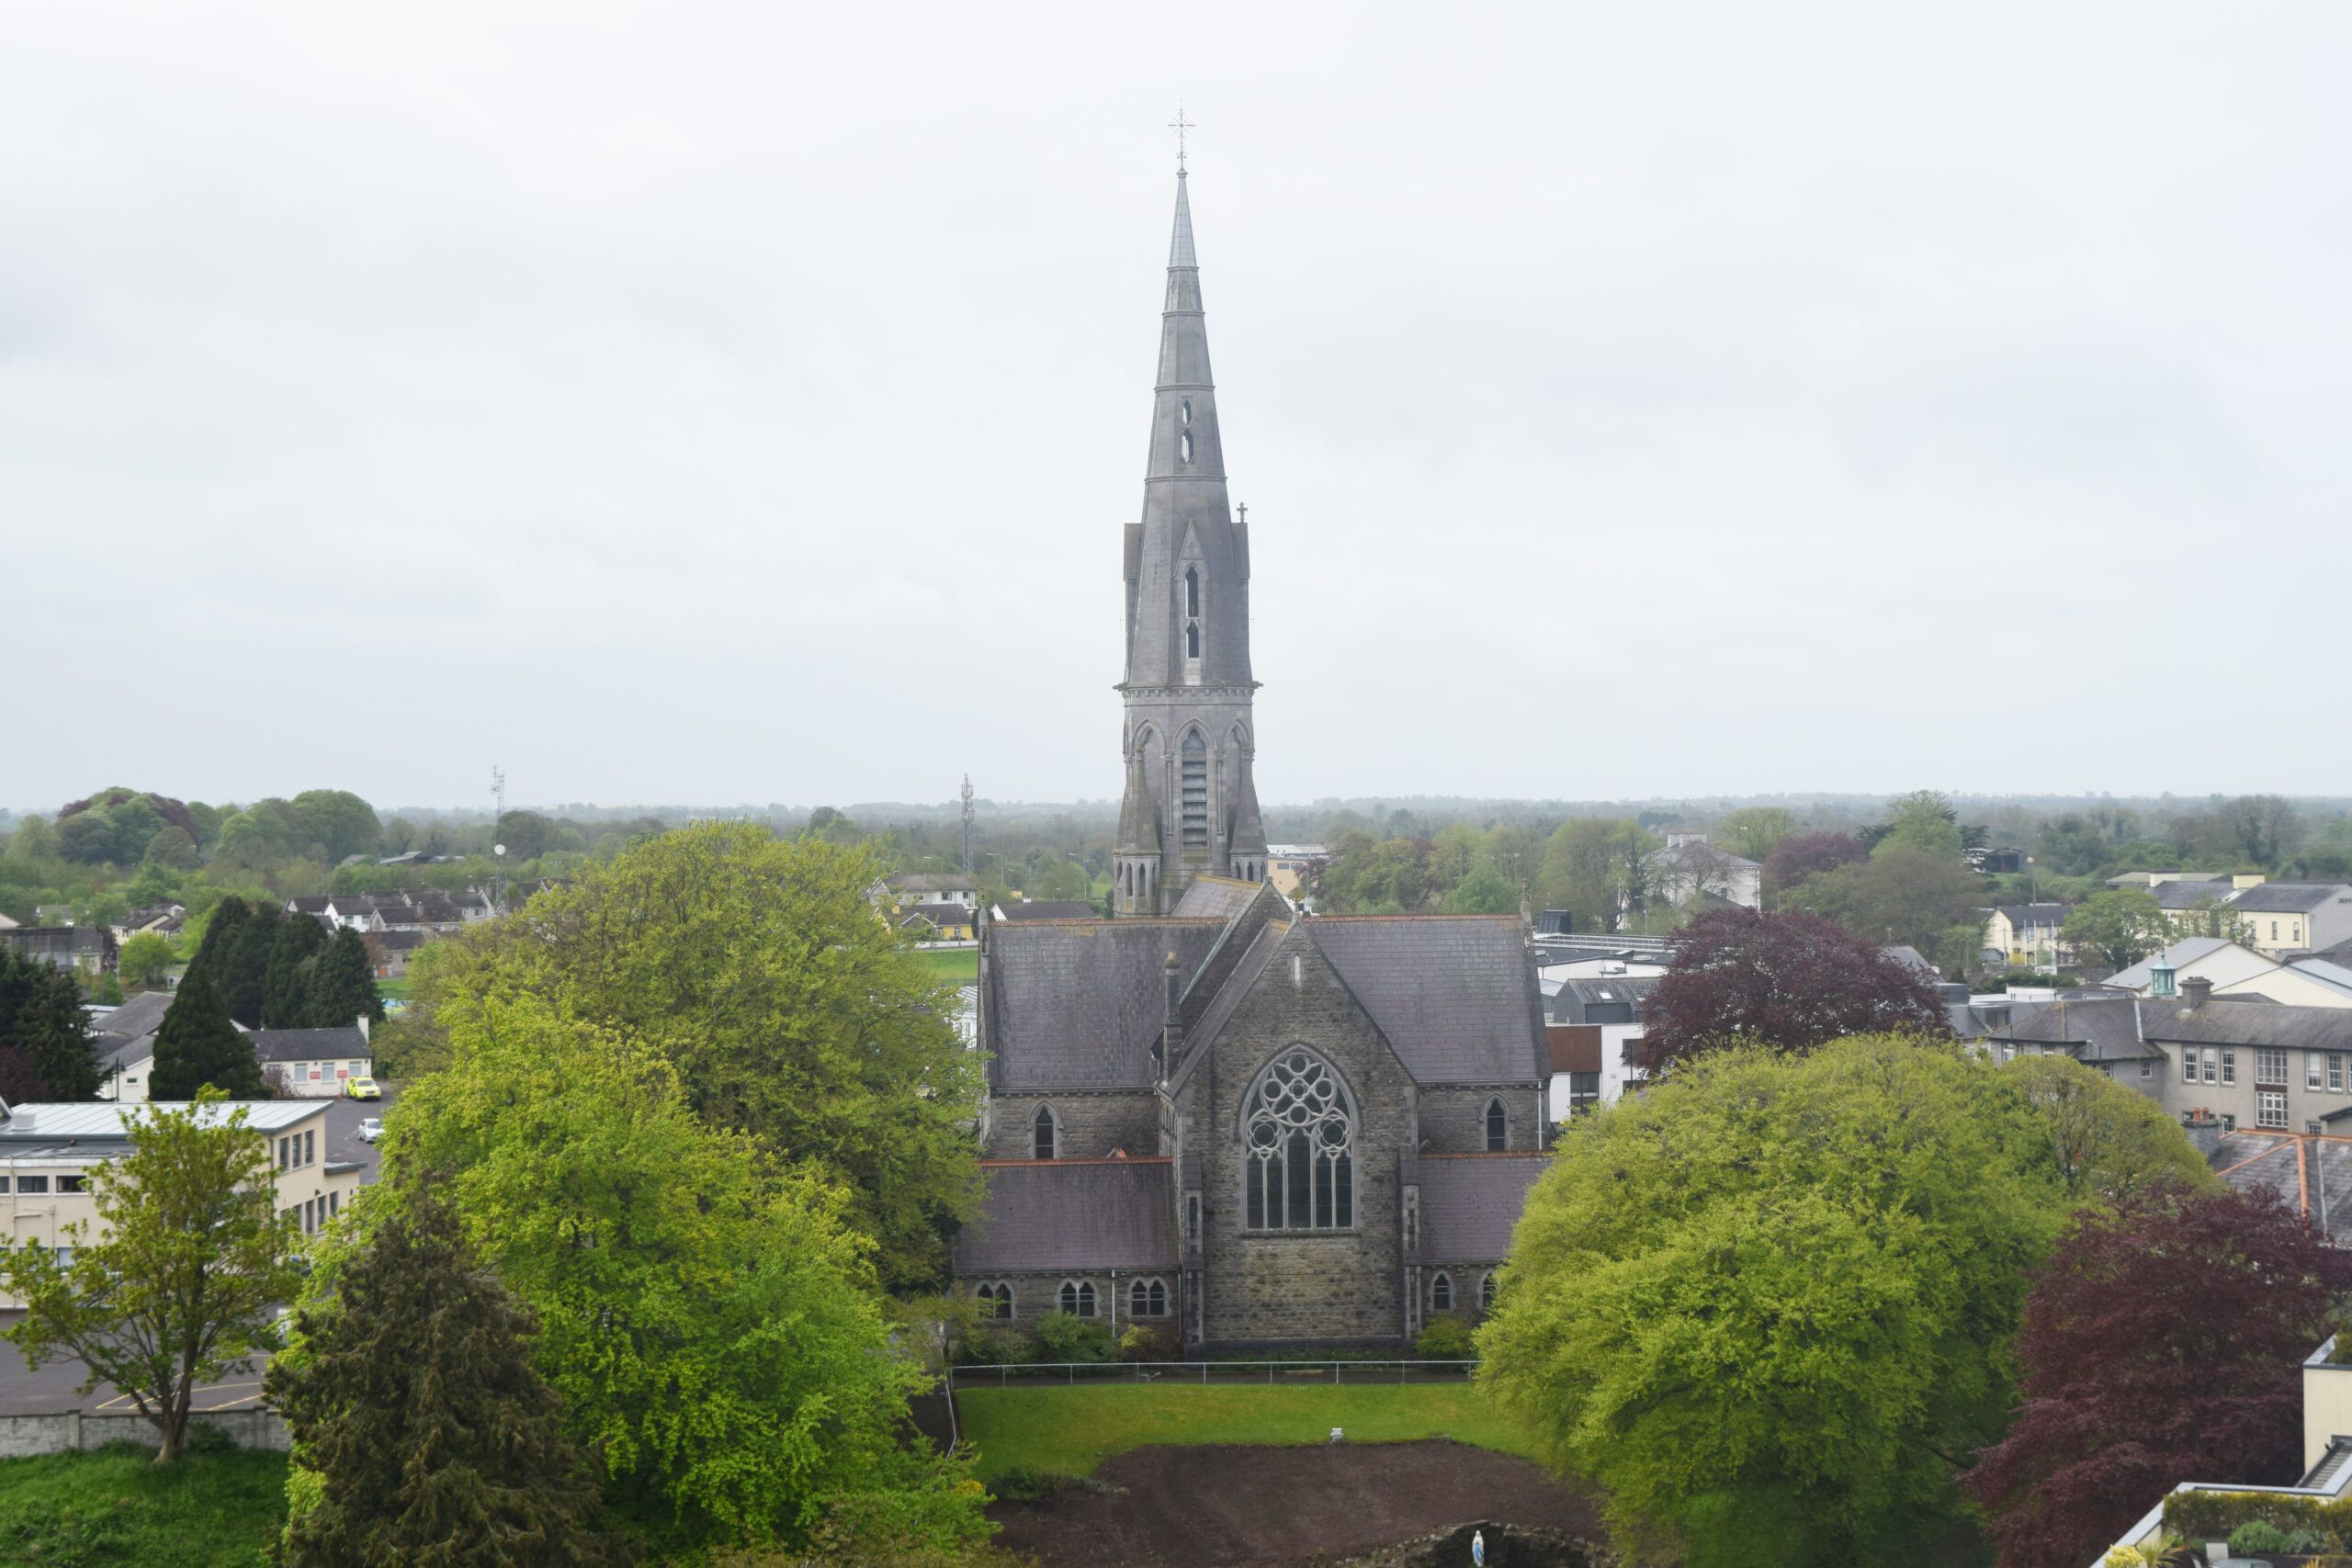 Church at County Meath, Ireland, shot from the top of Trim Castle